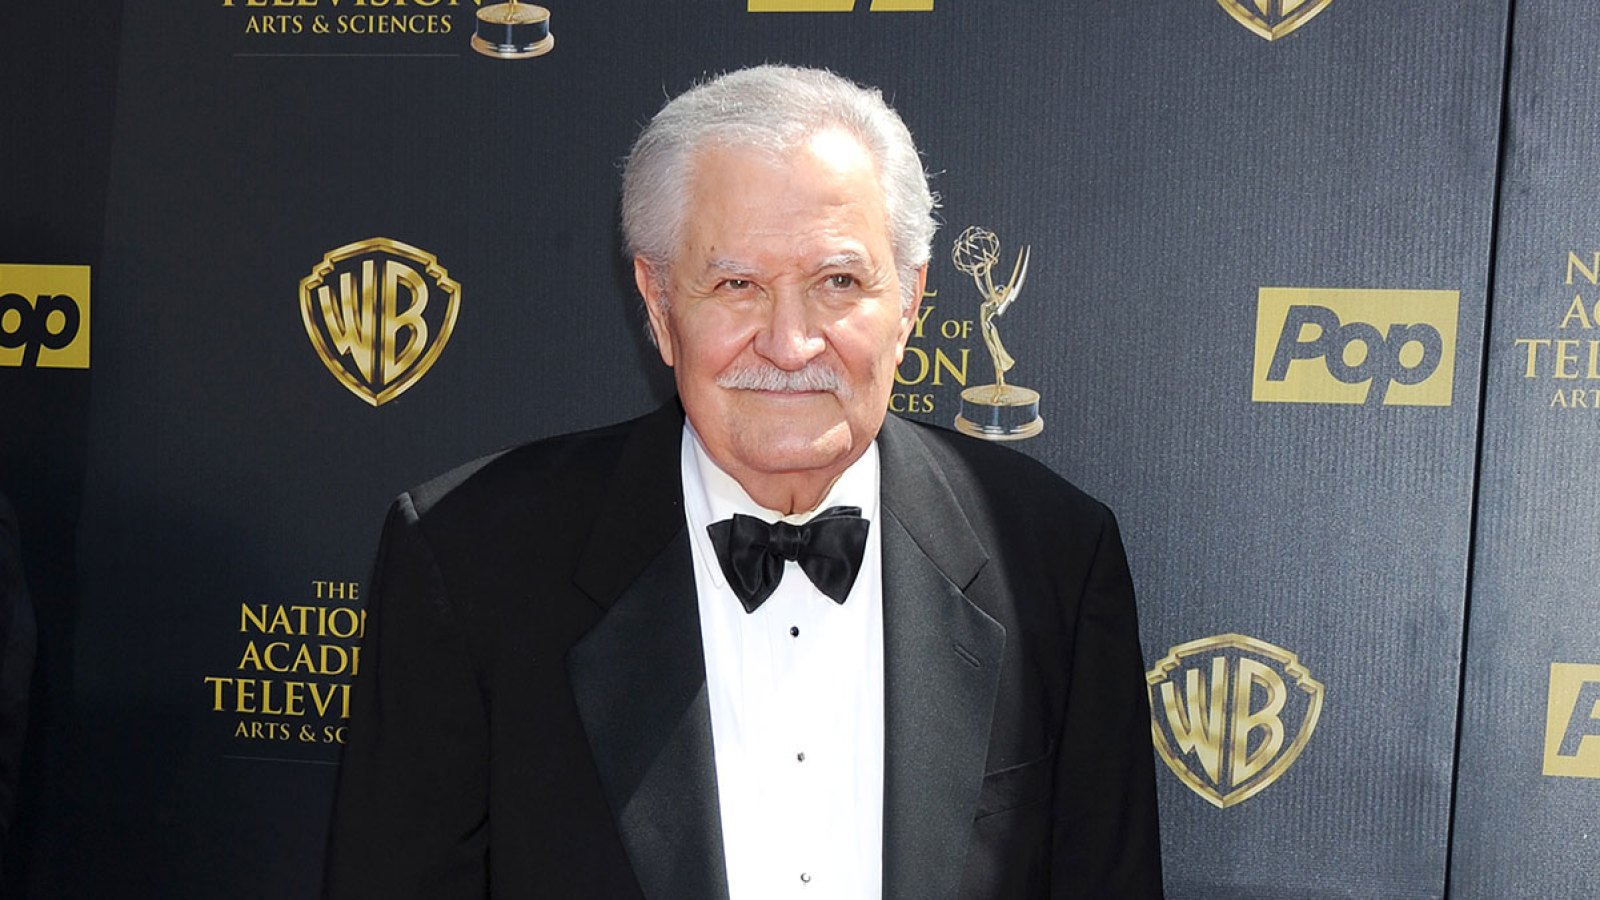 When Will John Aniston's Final Episode of 'Days of Our Lives' Air